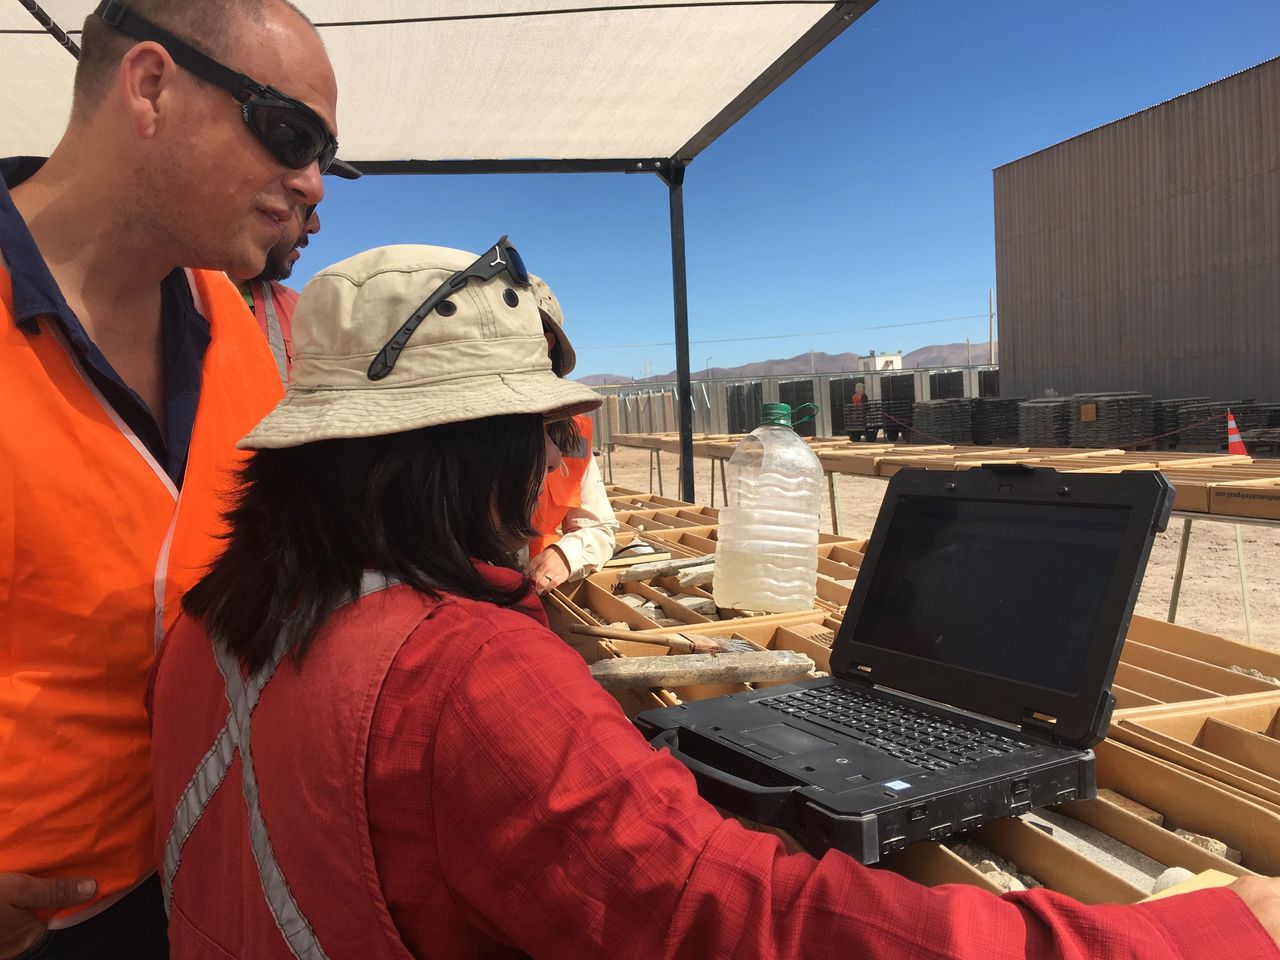 Working onsite to implement new technology. The project champion is pictured at right. She was the main point of contact for the vendor, dealt with all onsite issues and was involved in the data management portion of the project.